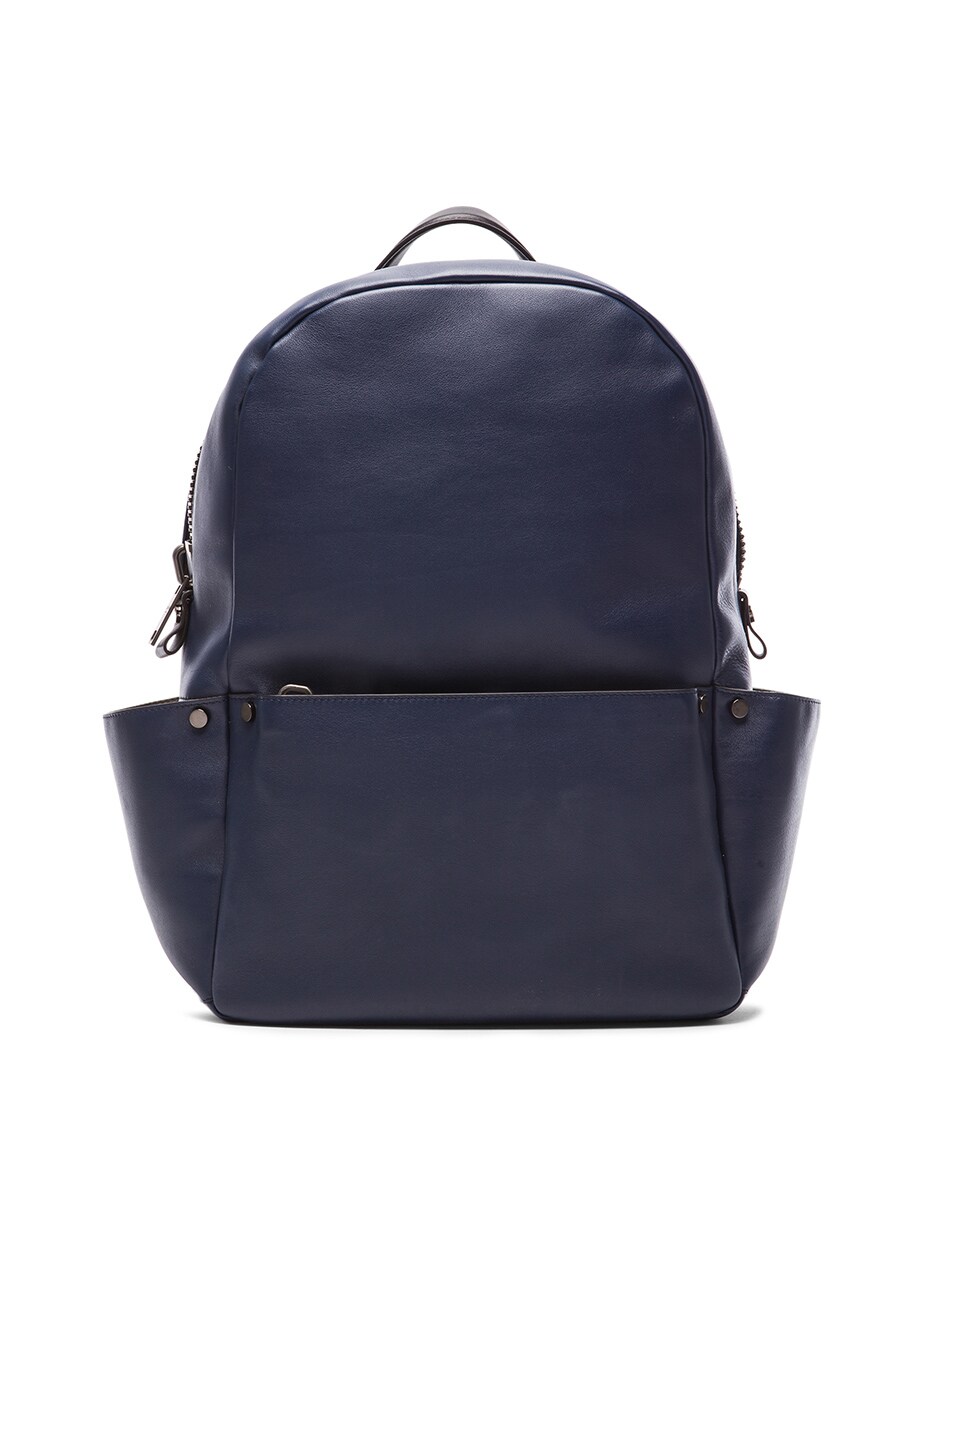 Image 1 of Calvin Klein Collection Utility Backpack in Black & Hudson